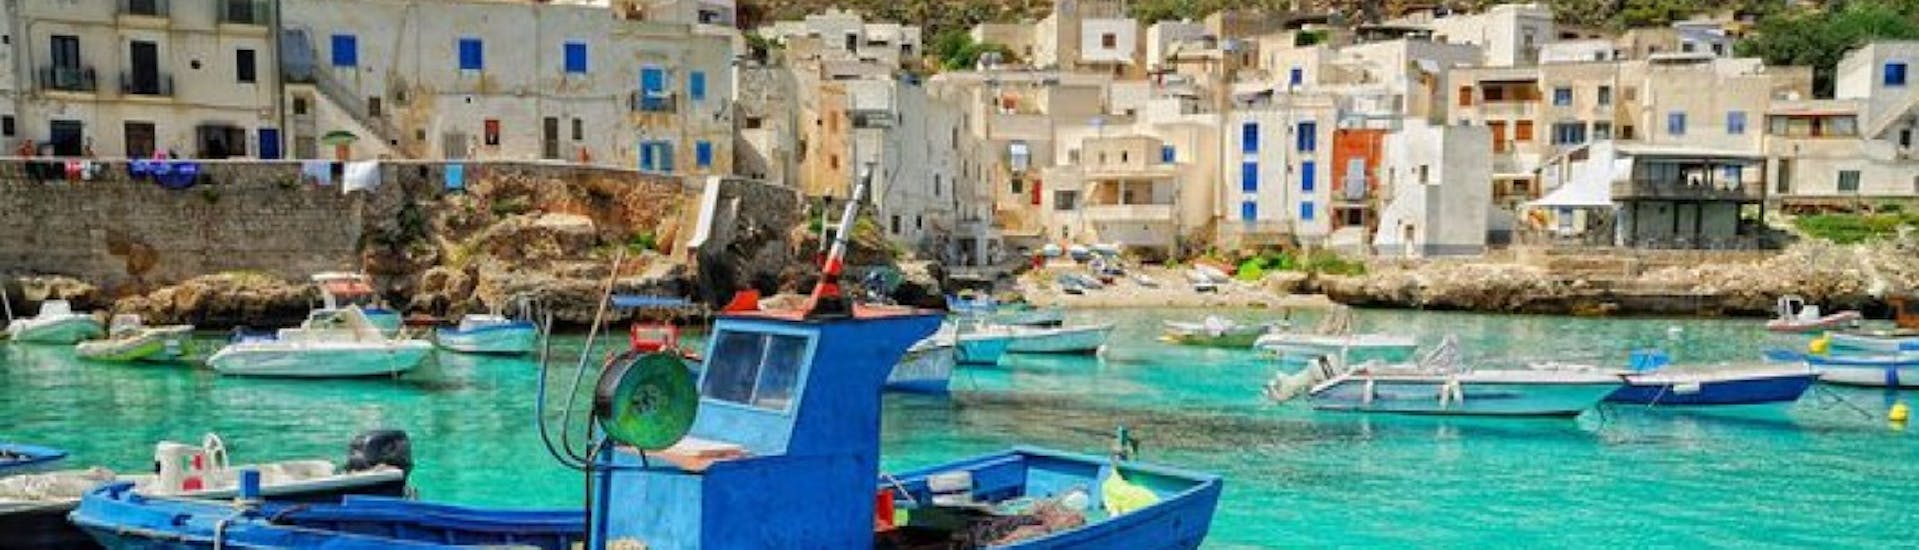 Private Boat Trip to Favignana and Levanzo from Trapani with Snorkeling.